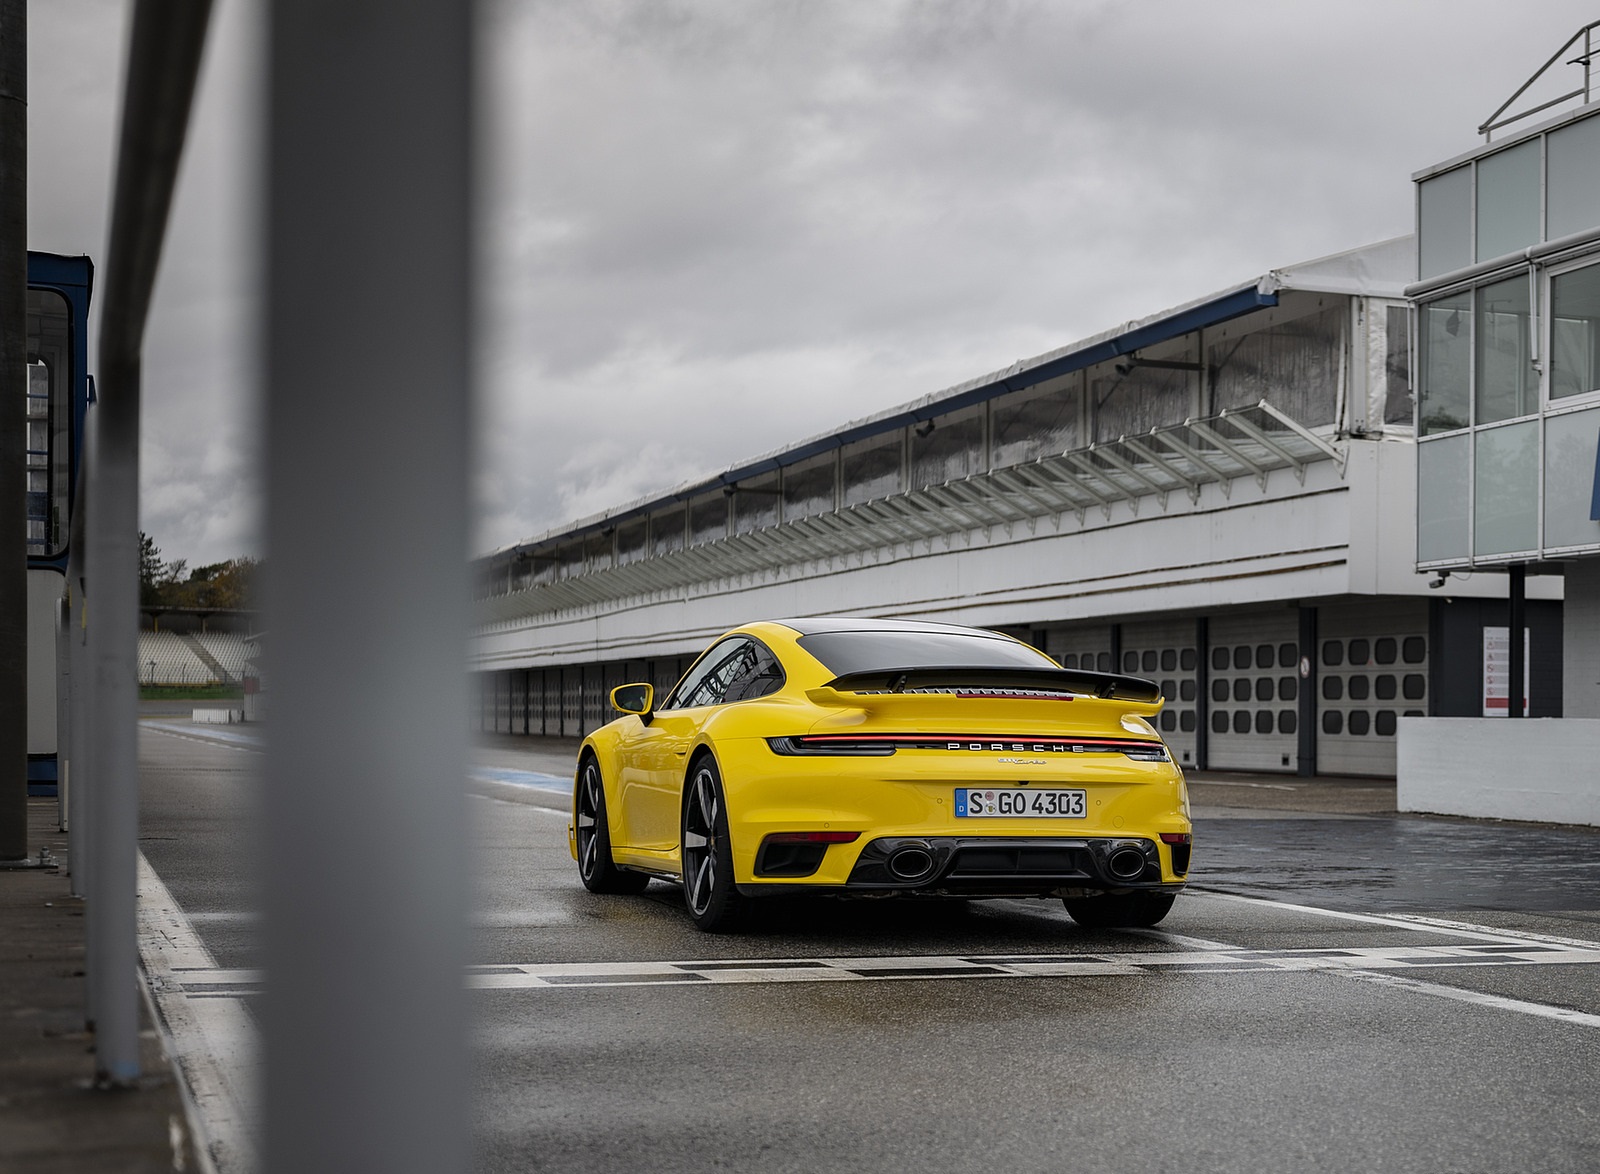 2021 Porsche 911 Turbo (Color: Racing Yellow) Rear Wallpapers  #19 of 225